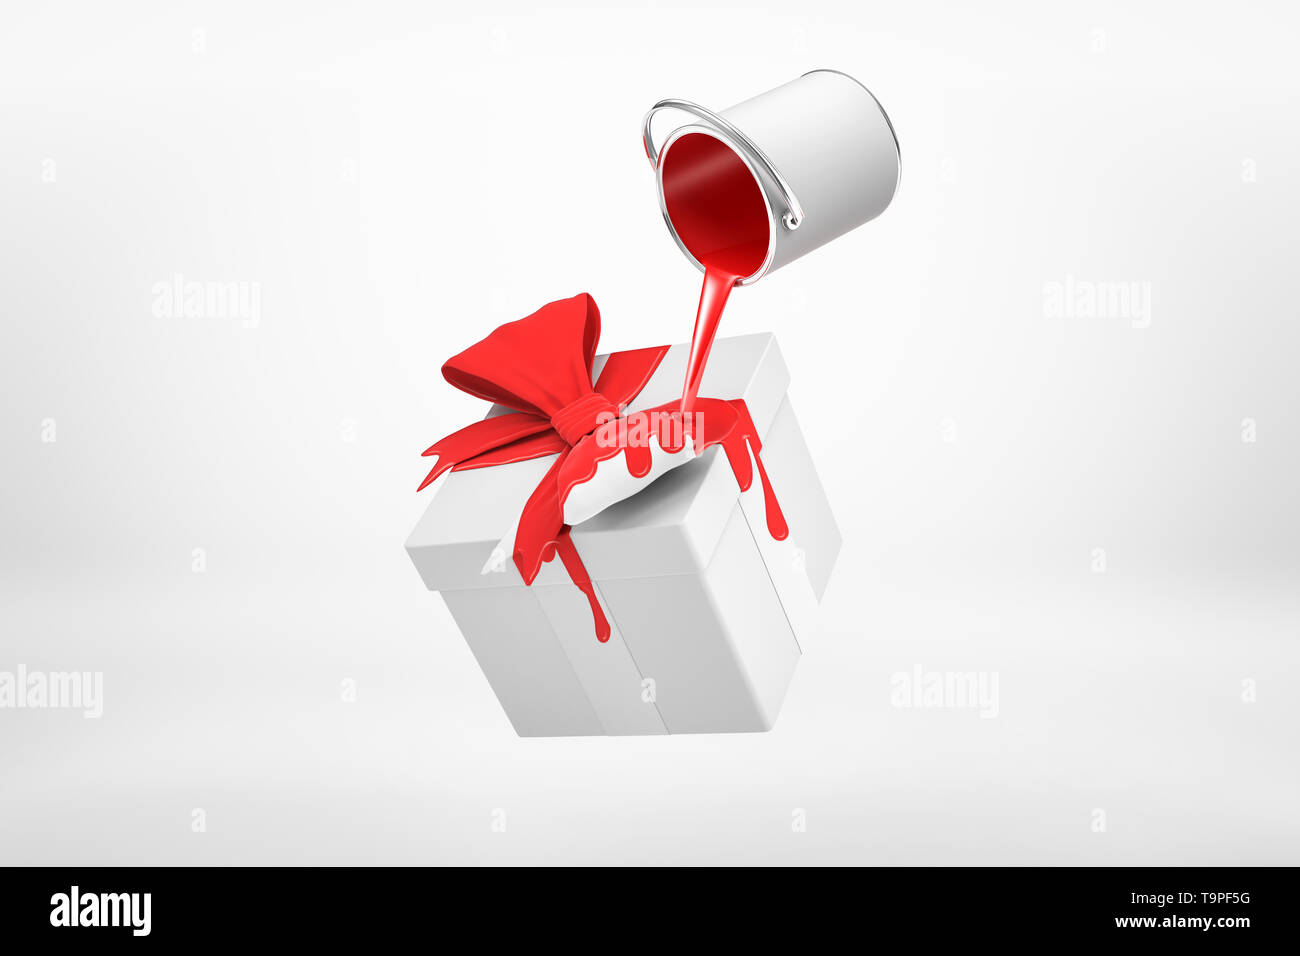 3d rendering of small silver paint bucket turned upside down with red paint pouring on white gift box with red ribbon isolated on white background Stock Photo